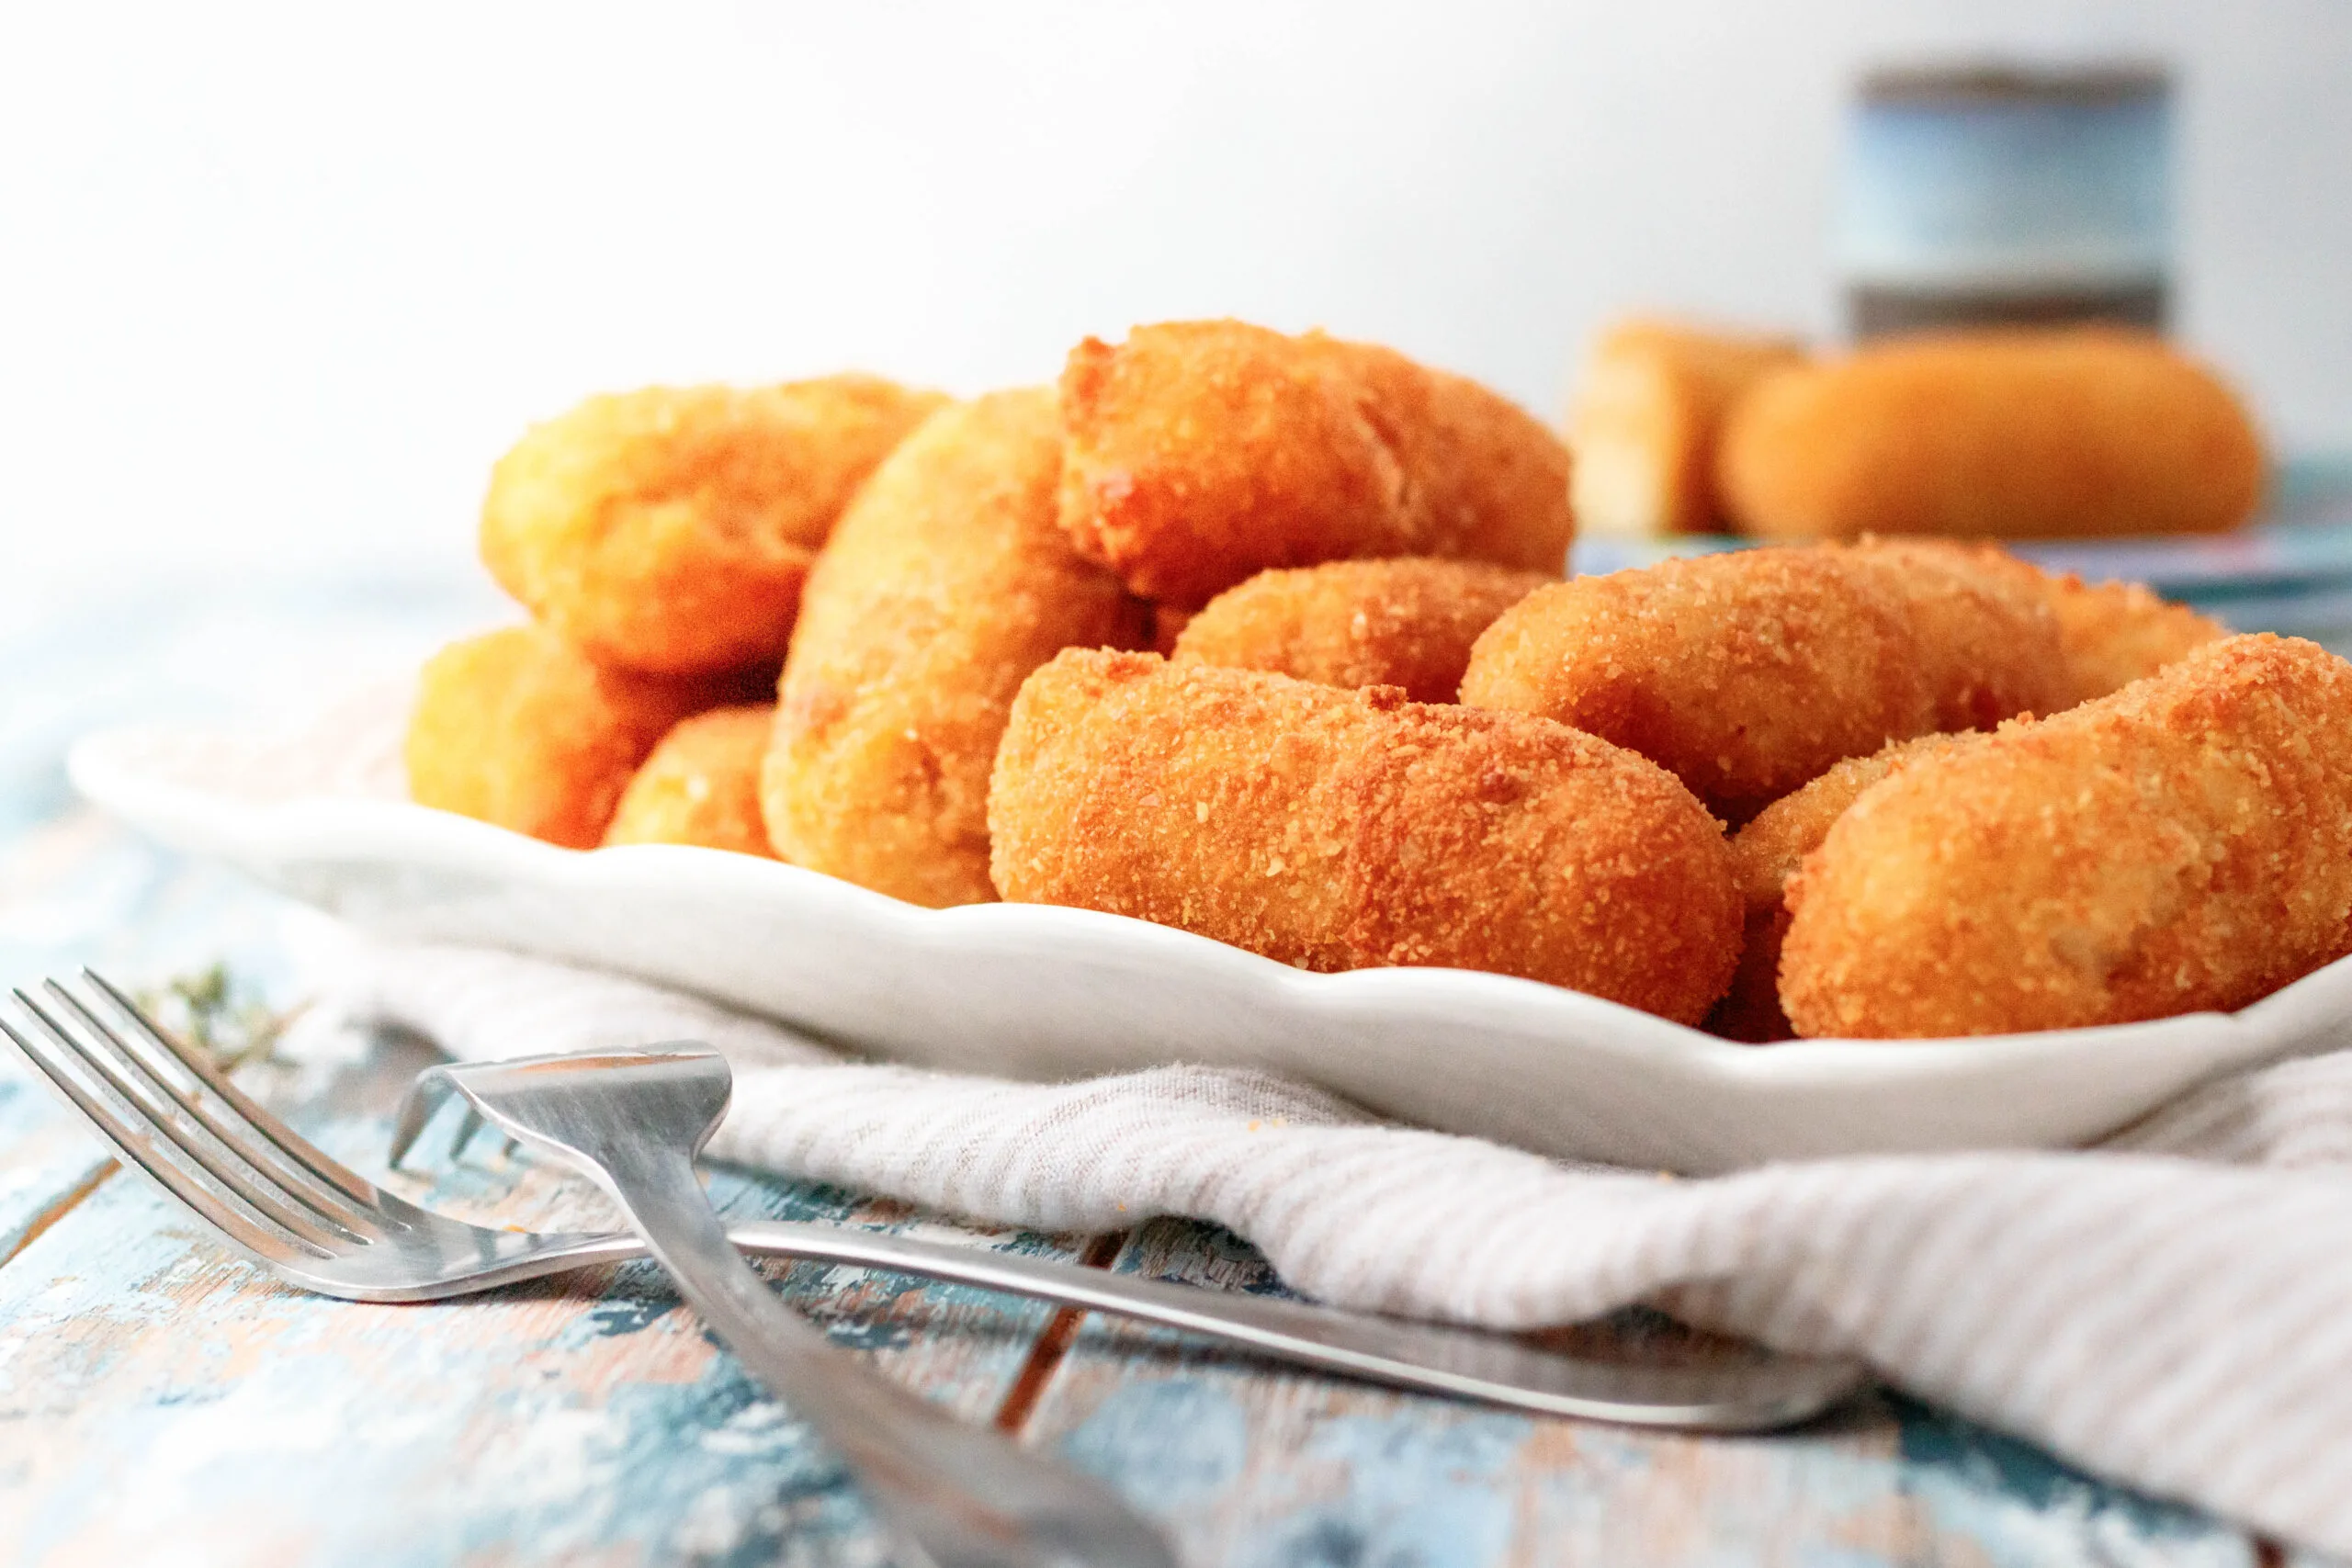 chicken croquettes piles on a white rectangle serving plate ready to enjoy!